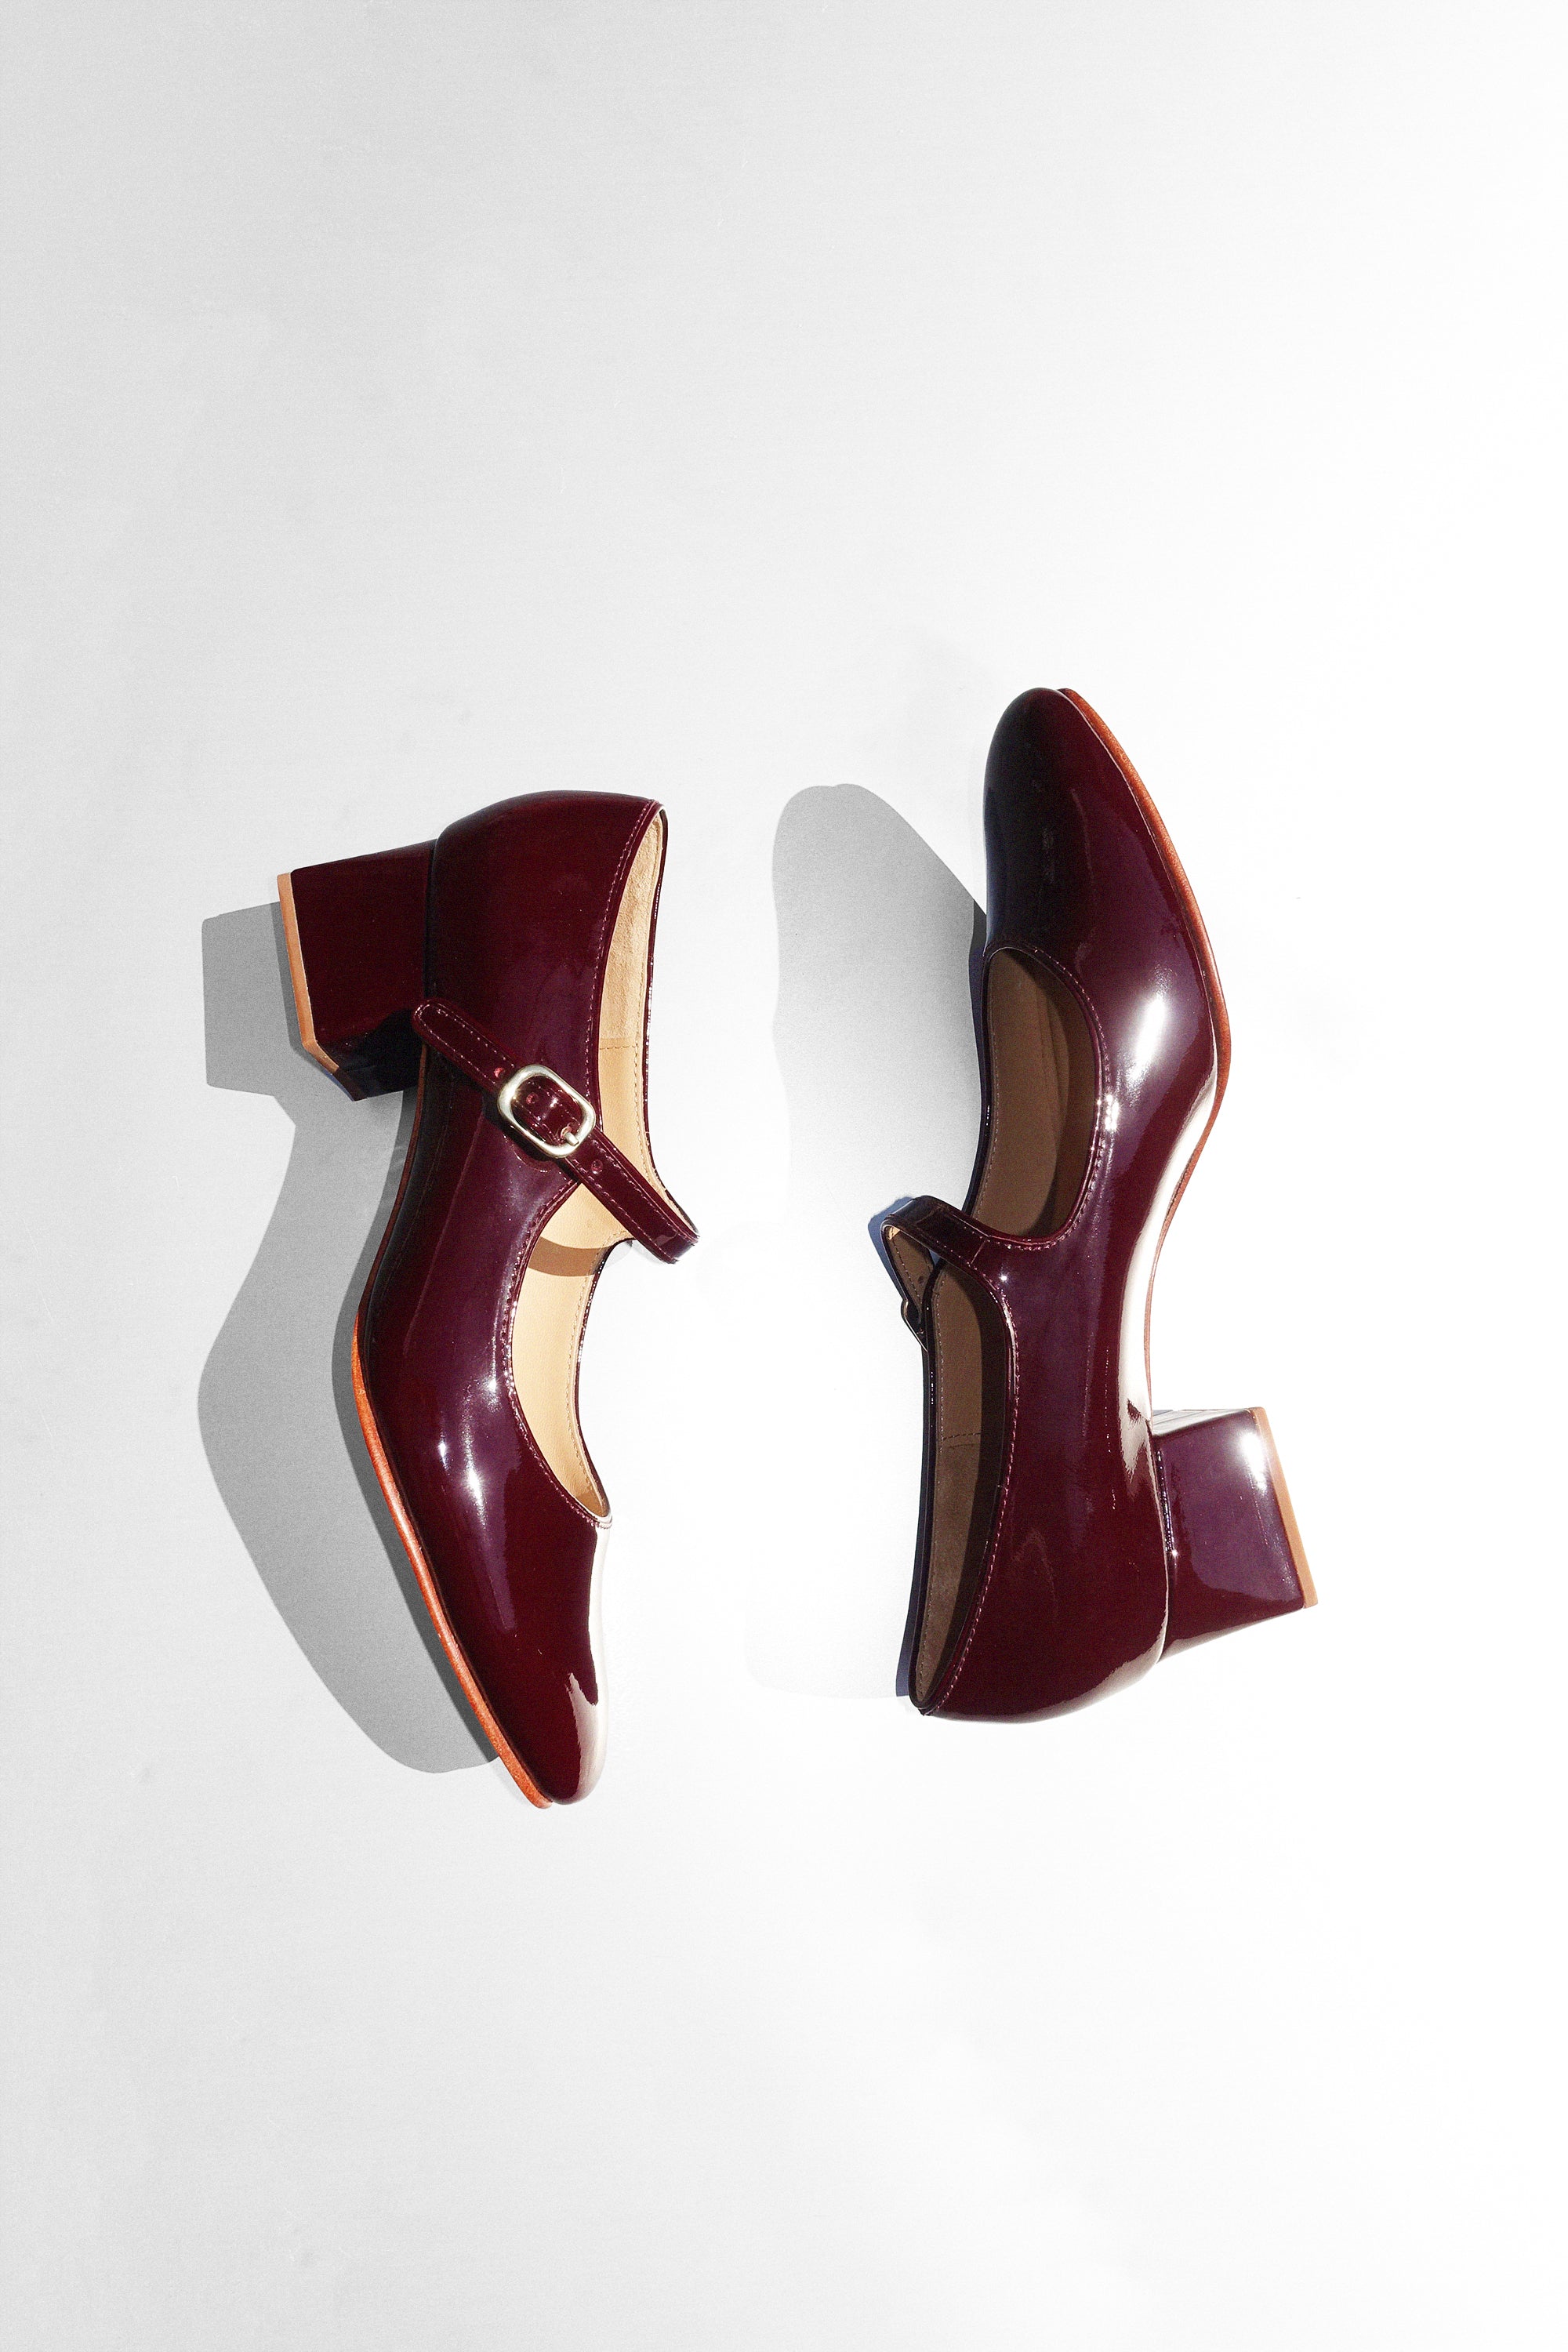 Florence Heel in Burgundy Patent Leather by Caron Callahan